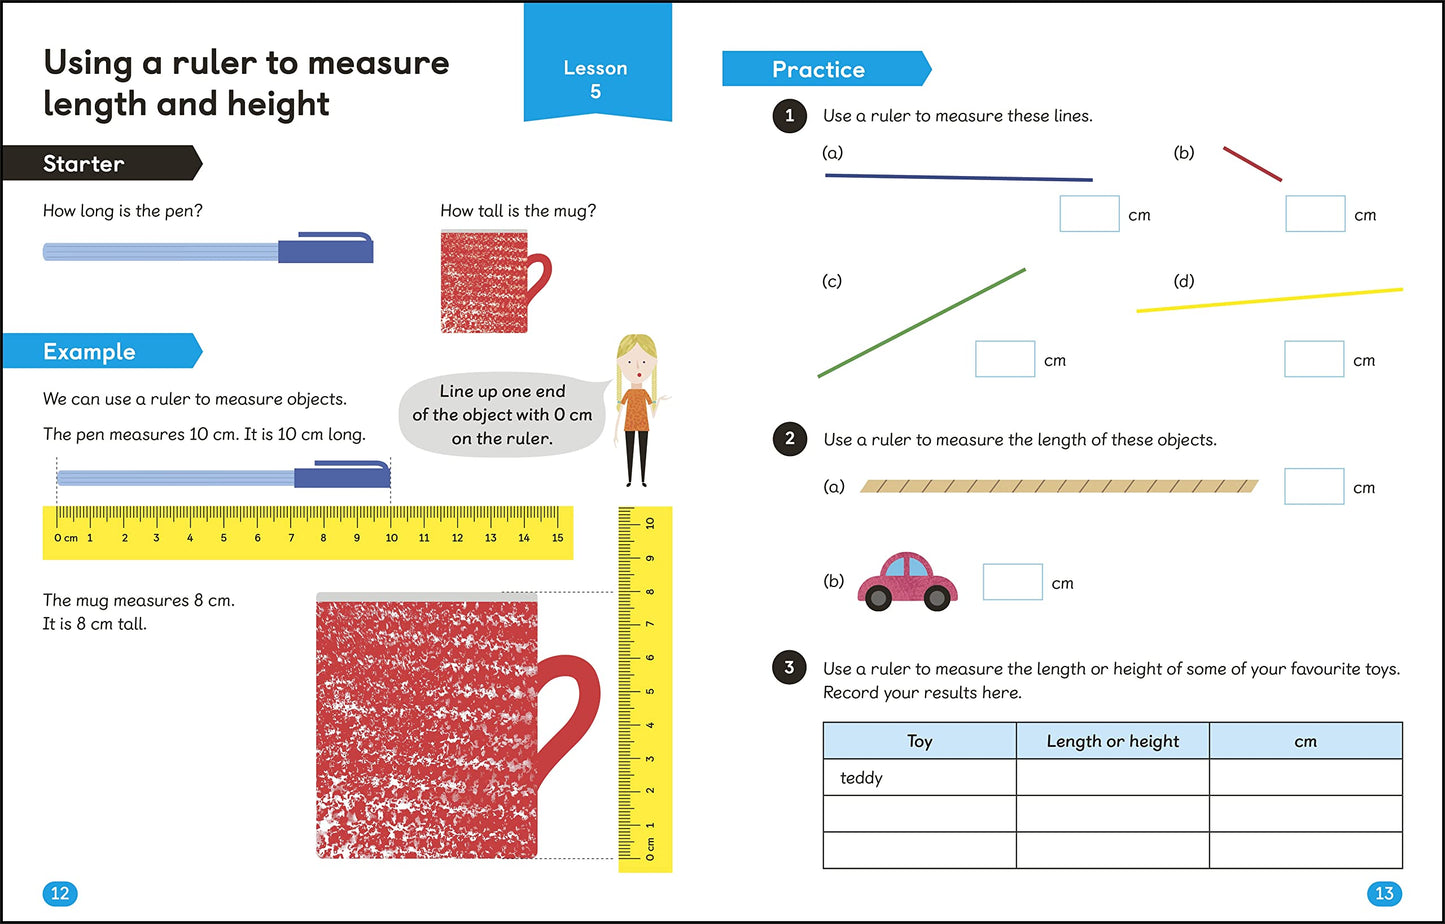 Maths ― No Problem! Measuring, Ages 4-6 (Key Stage 1) (Master Maths At Home)